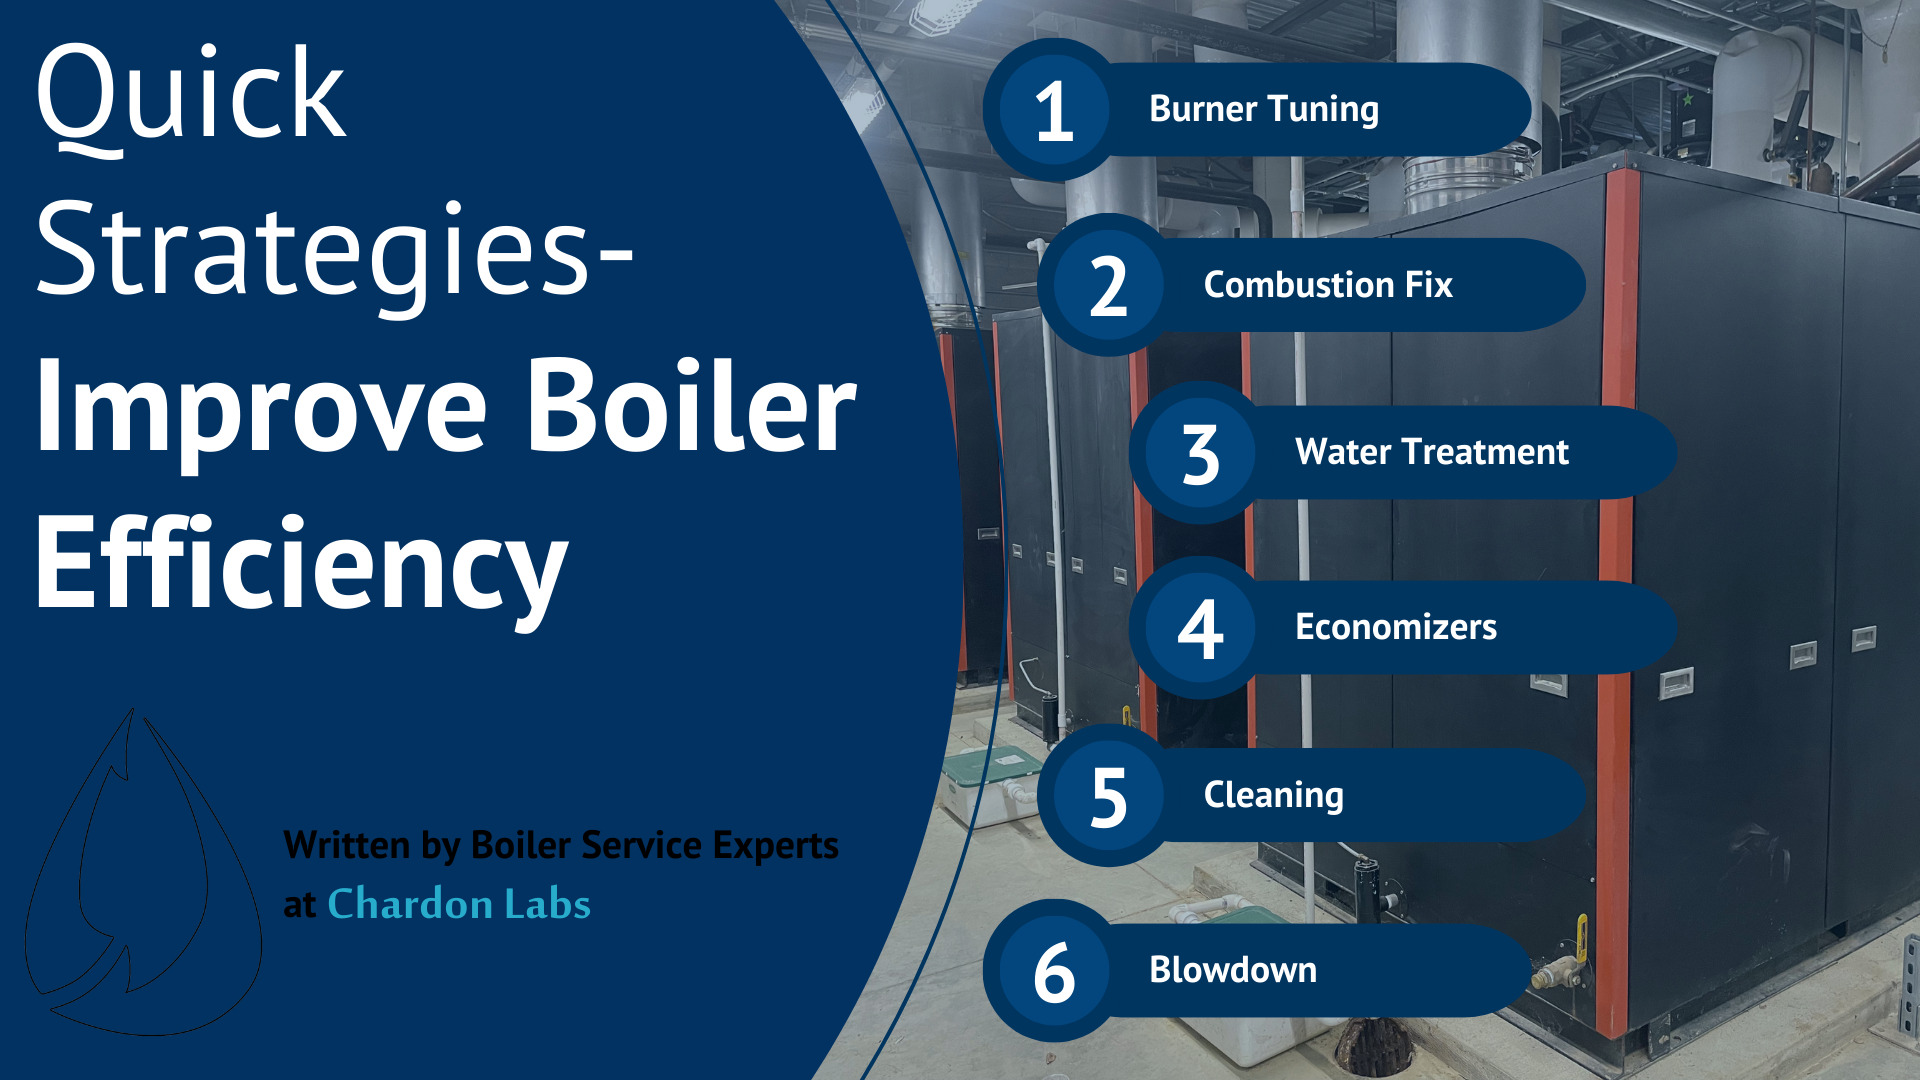 Increase Performance and Efficiency with Automated Boiler System Controls - Benefits of increasing performance and efficiency